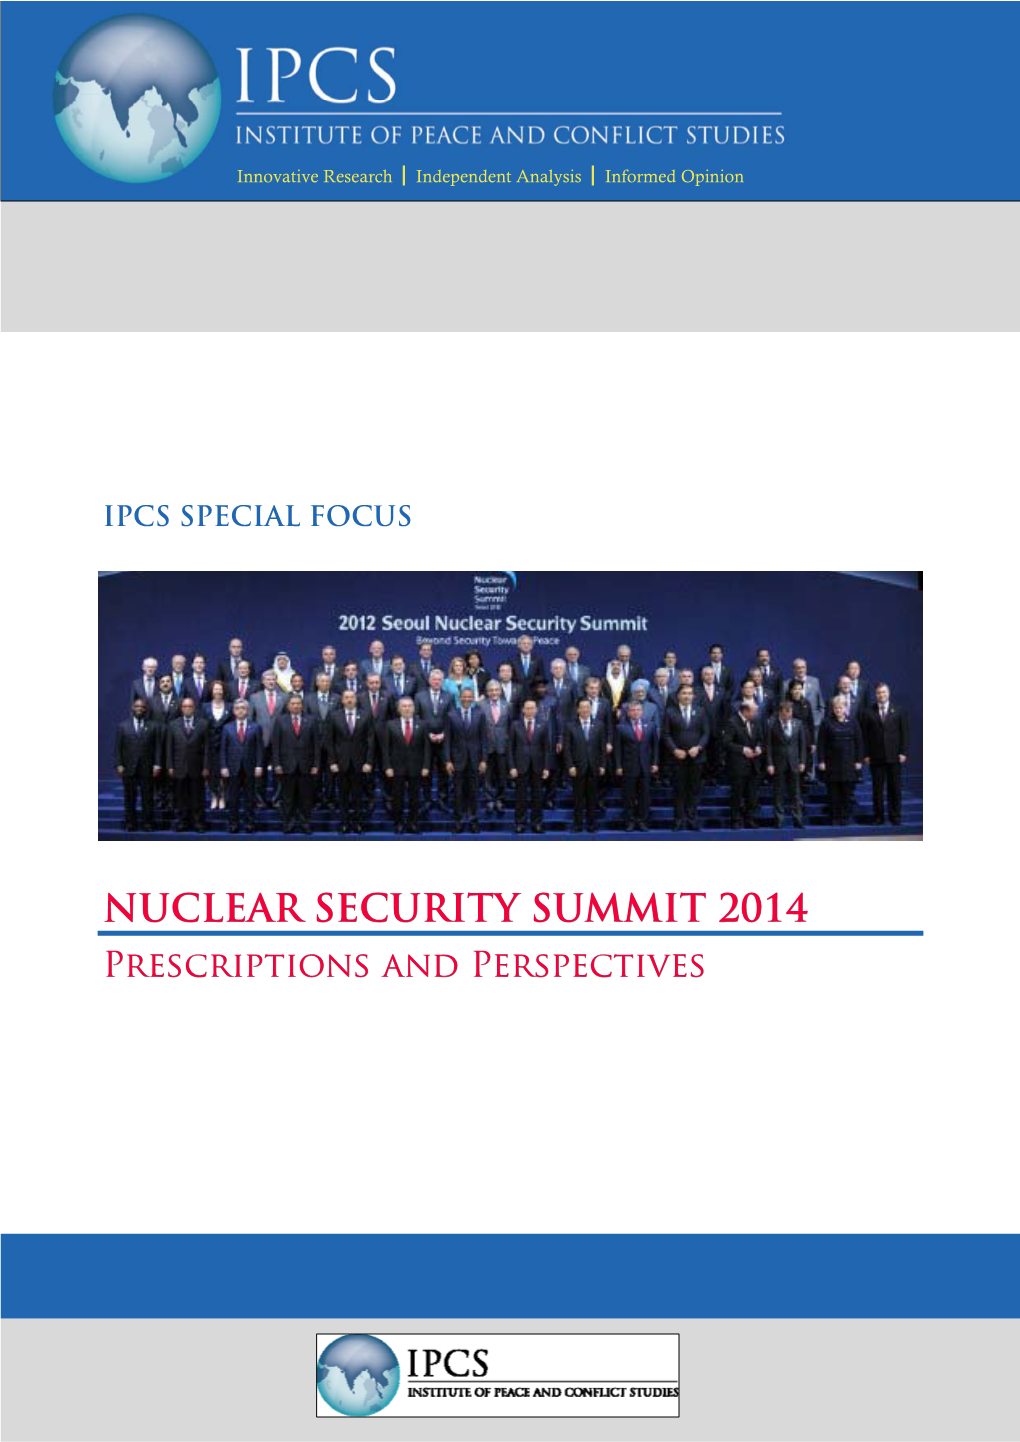 NUCLEAR SECURITY SUMMIT 2014 Prescriptions and Perspectives